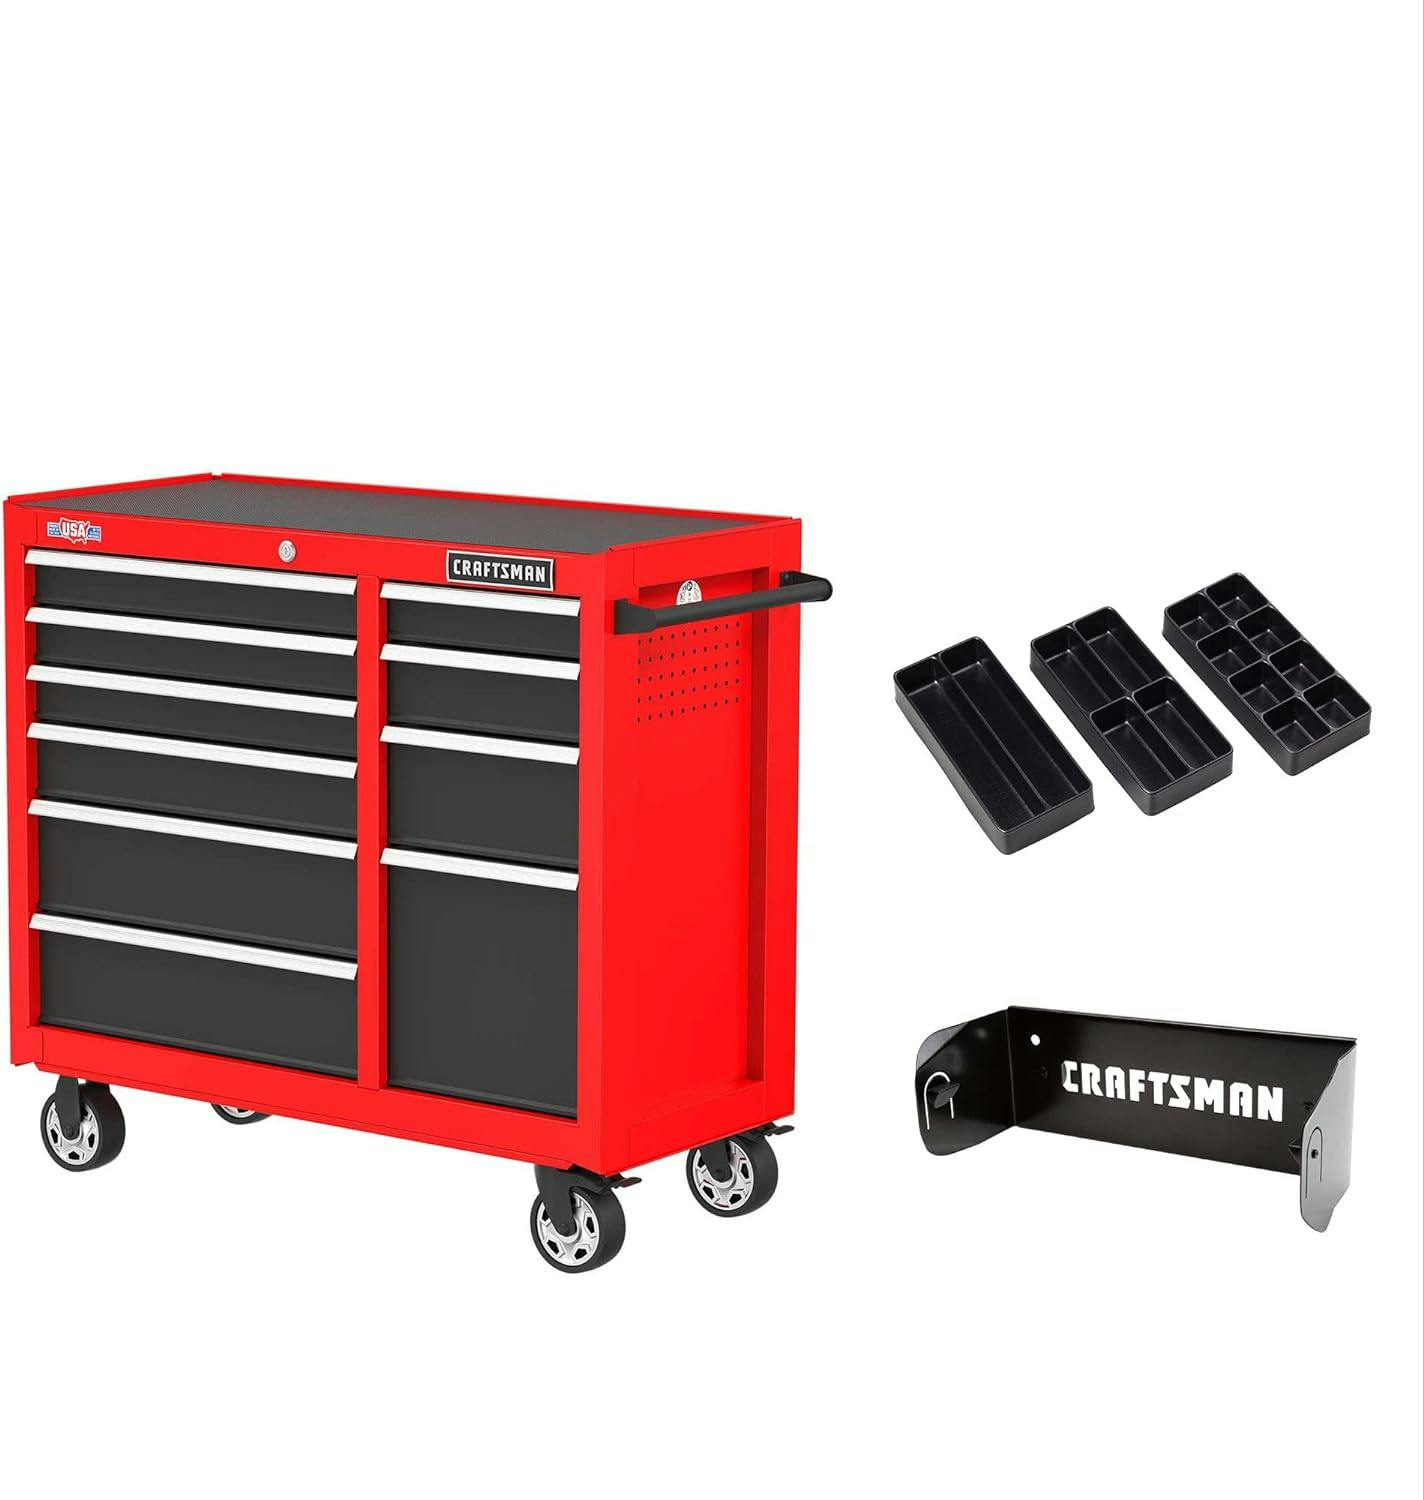 Gloss Red and Black 41" Rolling Tool Cabinet with Soft-Close Drawers